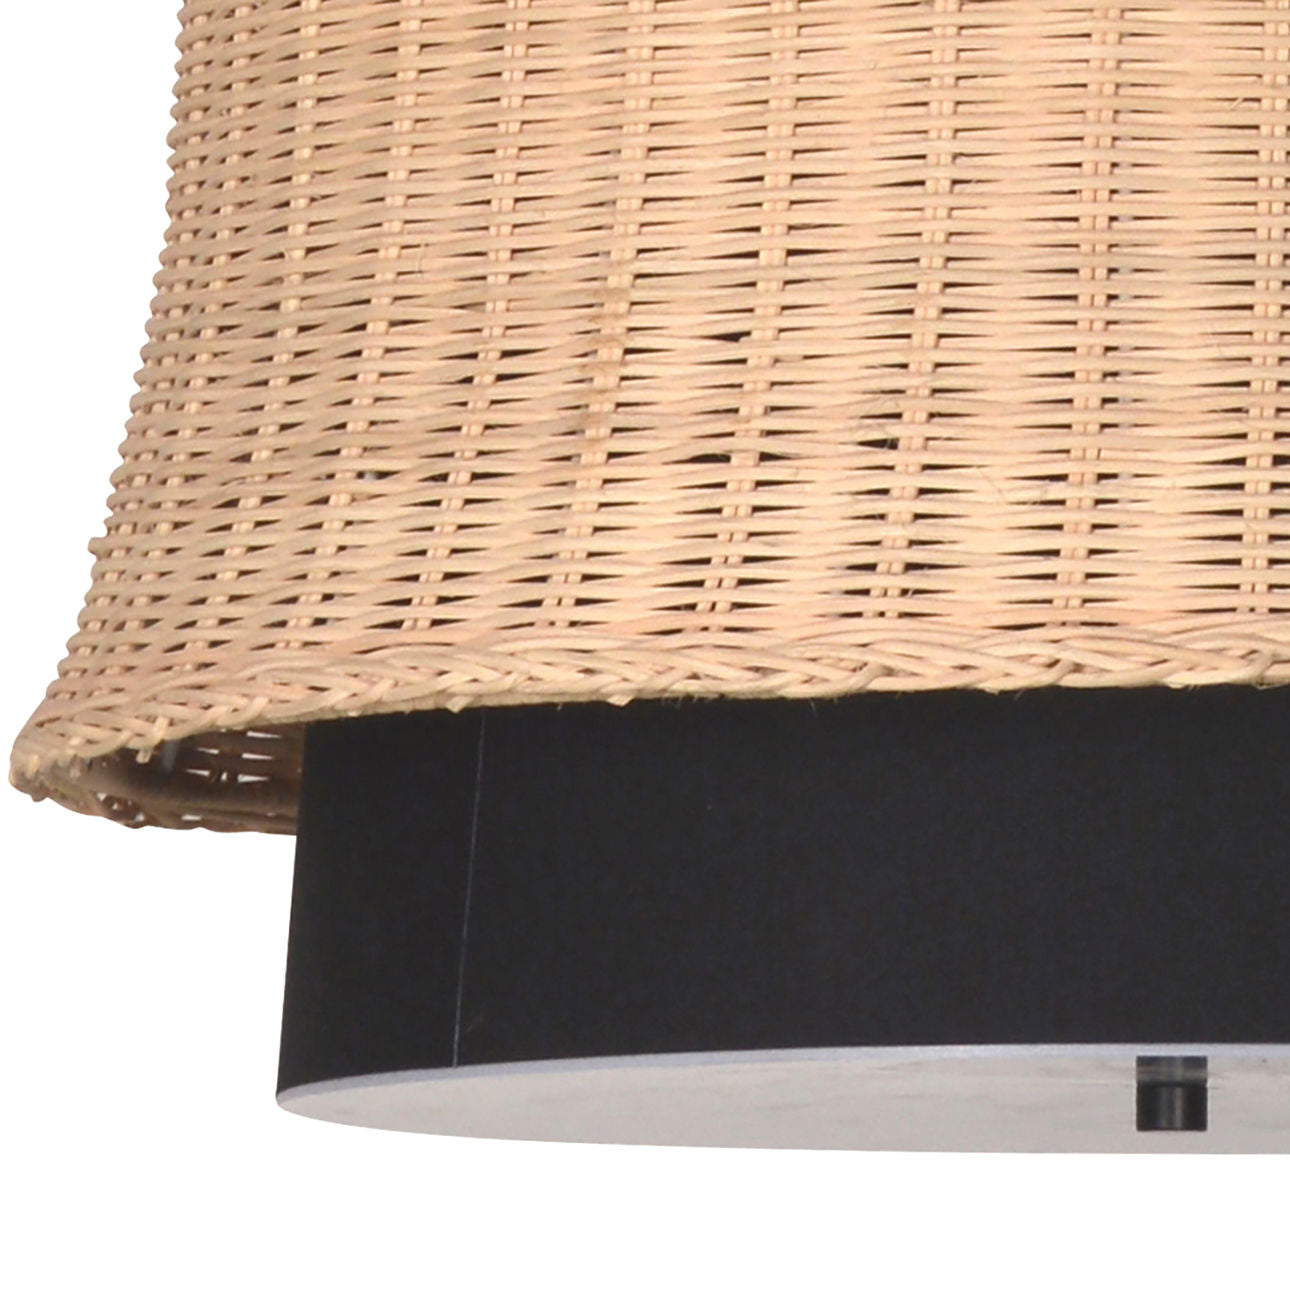 Made of fabric and beautifully natural woven rattan, the Chrisley Pendant Light is a wonderfully modern and airy fixture to hang above your kitchen island or bedroom nightstands. Amethyst Home provides interior design services, furniture, rugs, and lighting in the Chicago metro area.